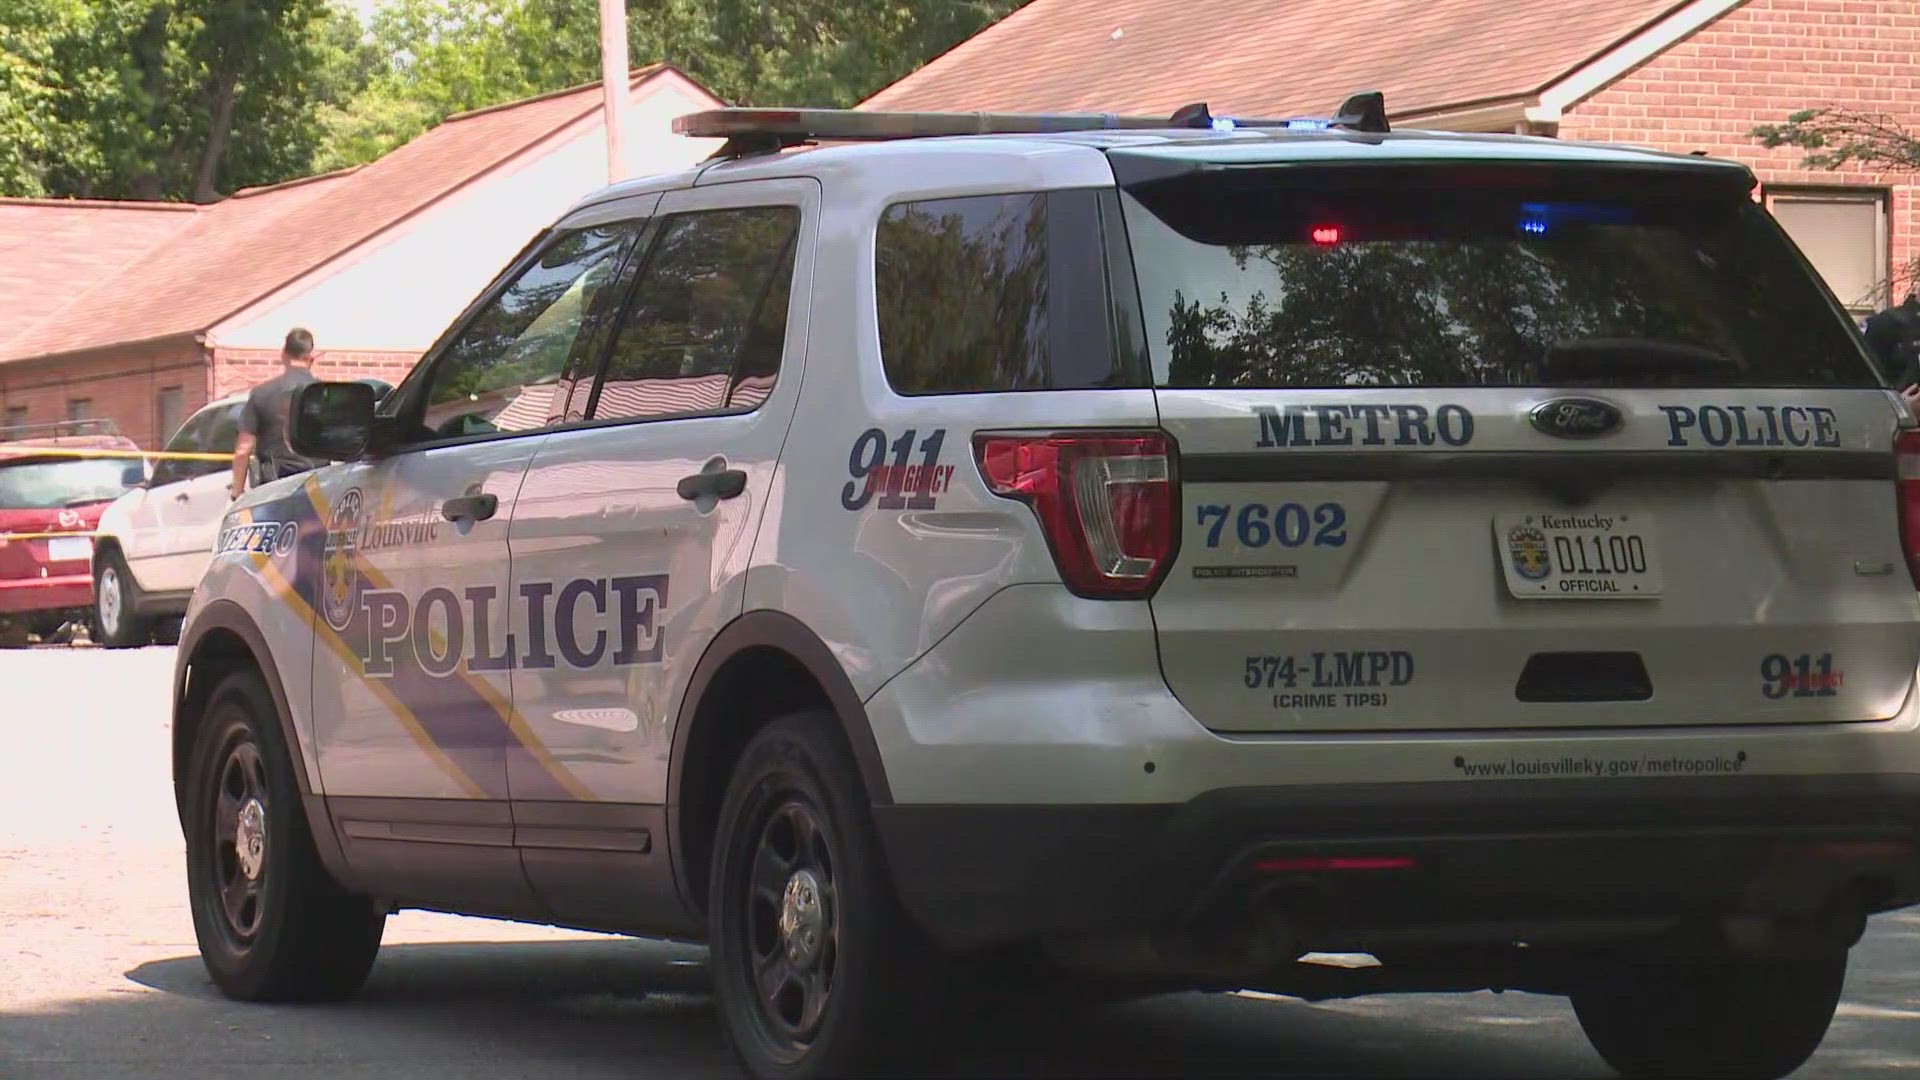 Louisville Metro Police was dispatched on a report of a shooting in the 600 block of Country Club Road.